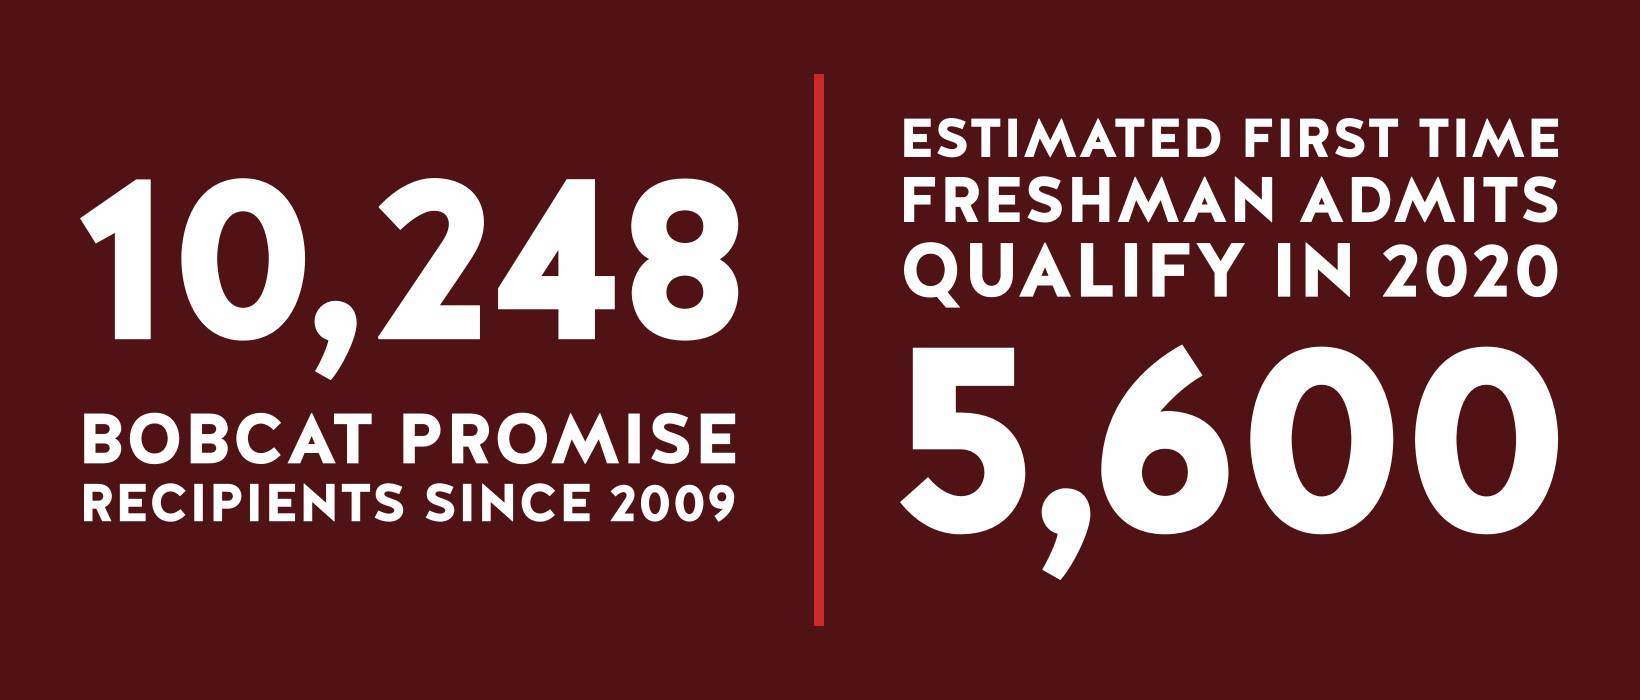 10,248 Bobcat Promise recipients since 2009 and 5,600 estimated first time freshman admits qualify in 2020